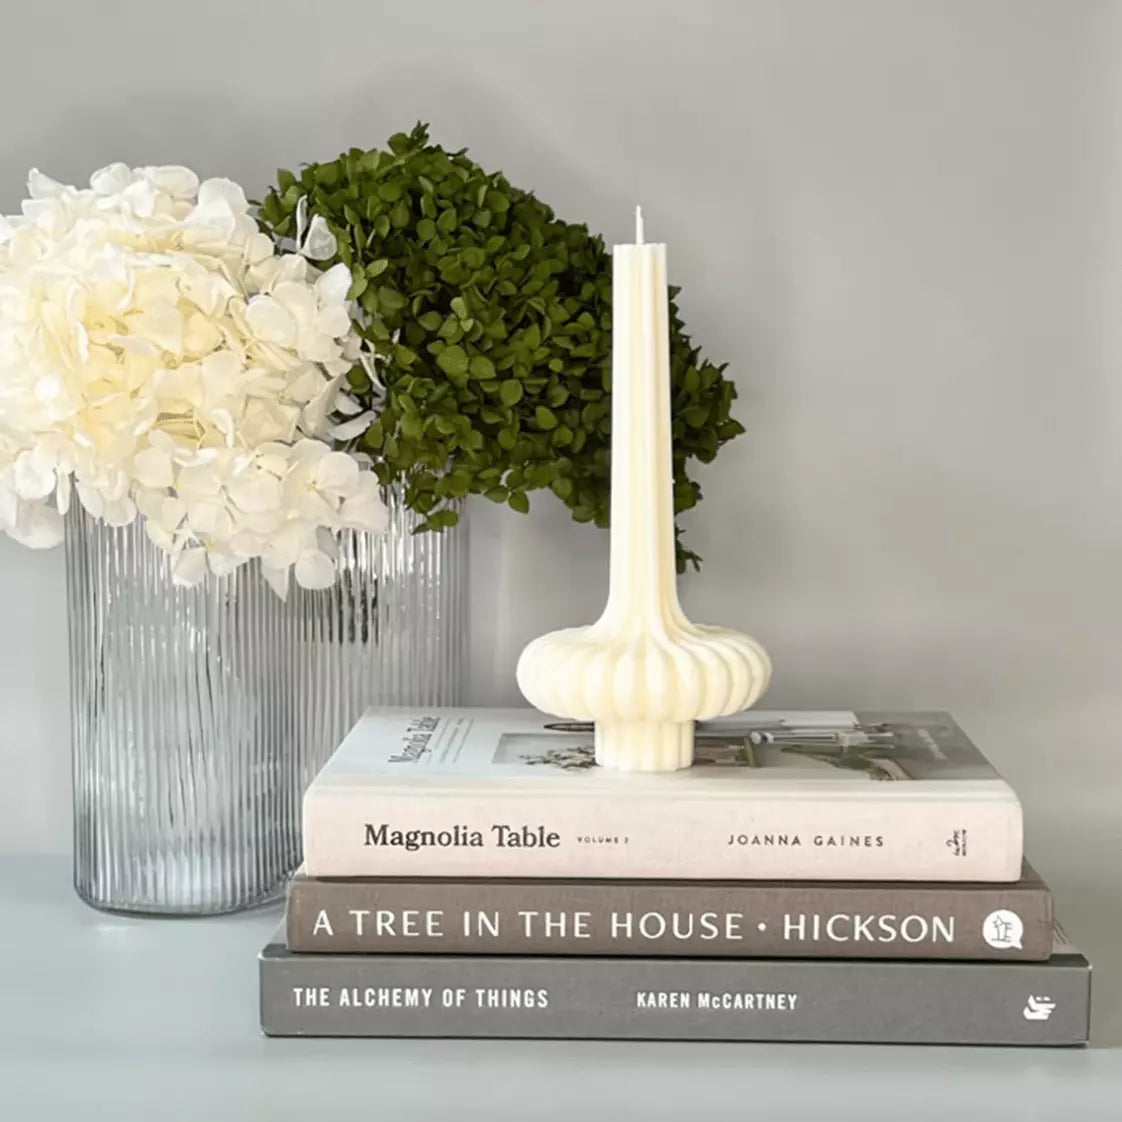 A Sculptural Soy Wax Candle - Sophia by Studio McKenna sits on top of a stack of books.